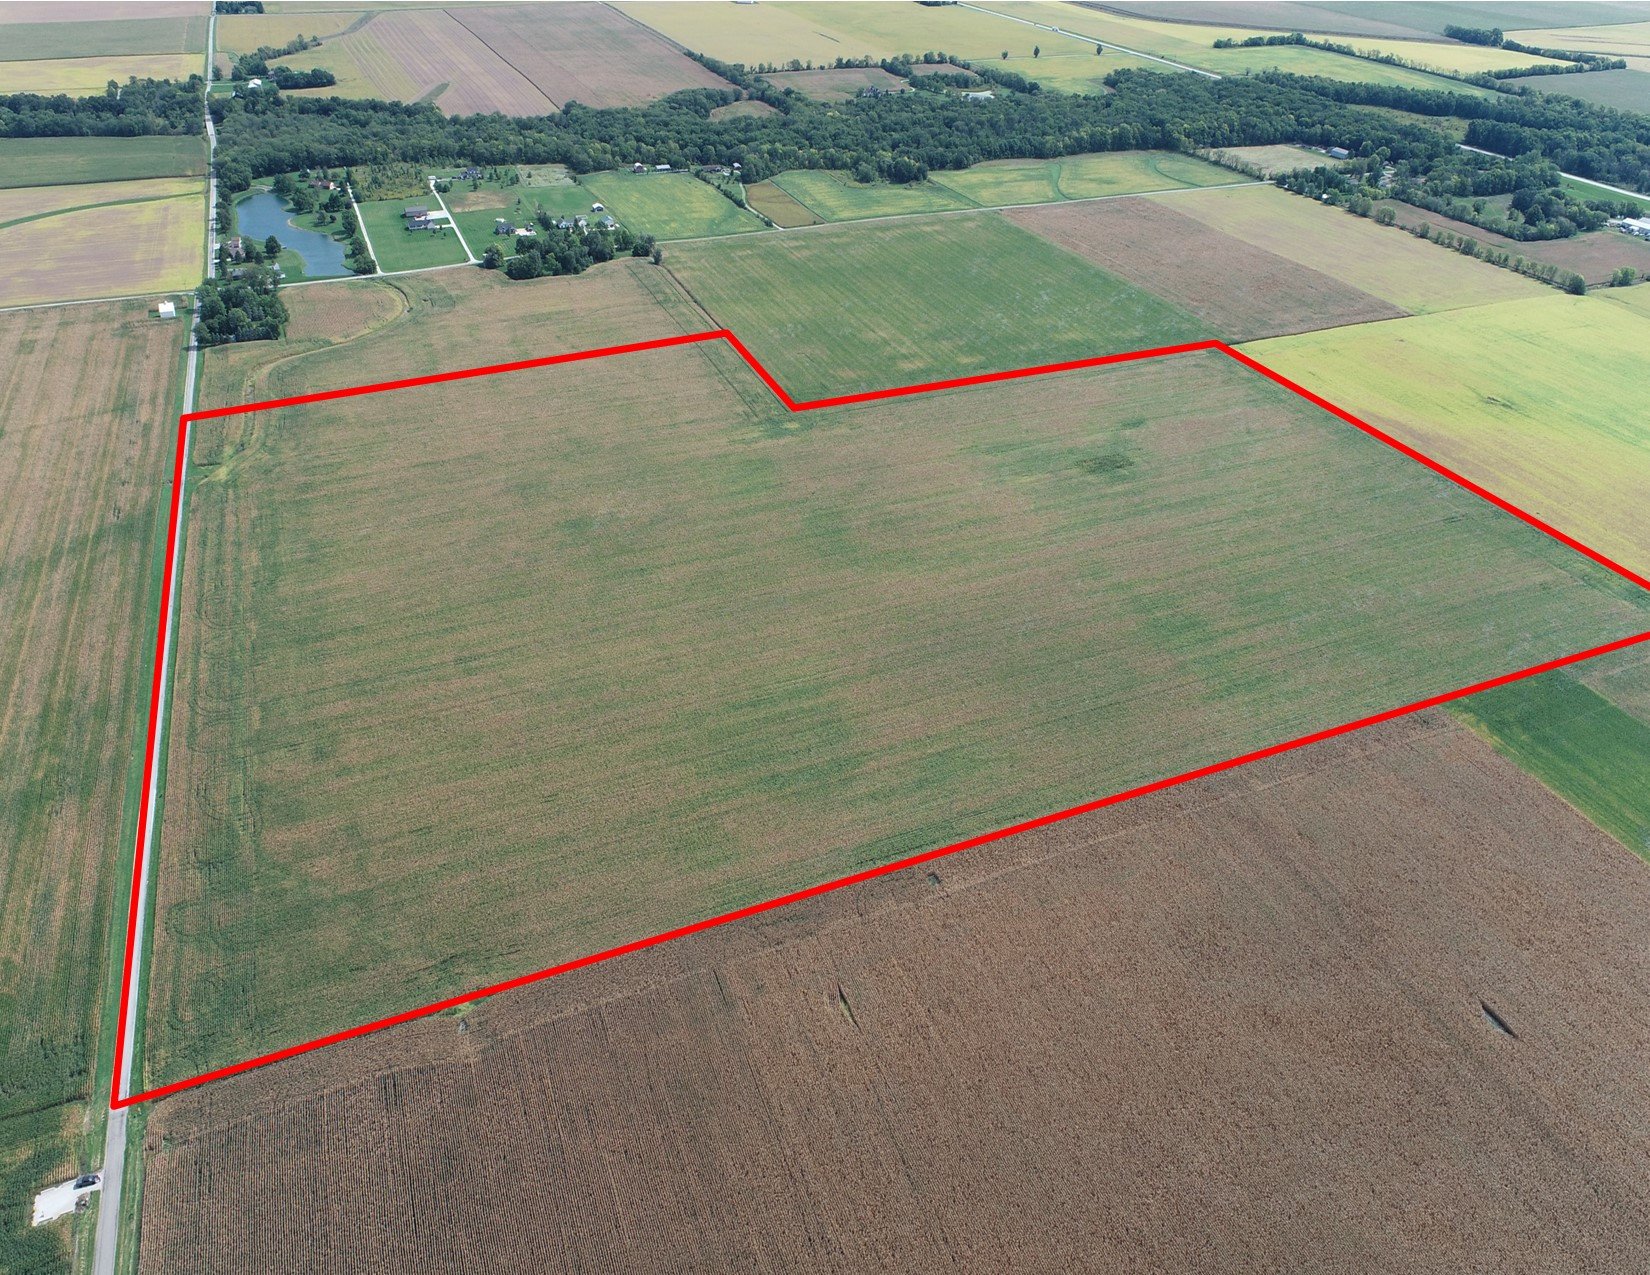 auctions-land-champaign-county-illinois-100-acres-listing-number-16443-Muralt Family Farms LLC 100 Acres, Drone Outlined v2 JPEG-1.jpg